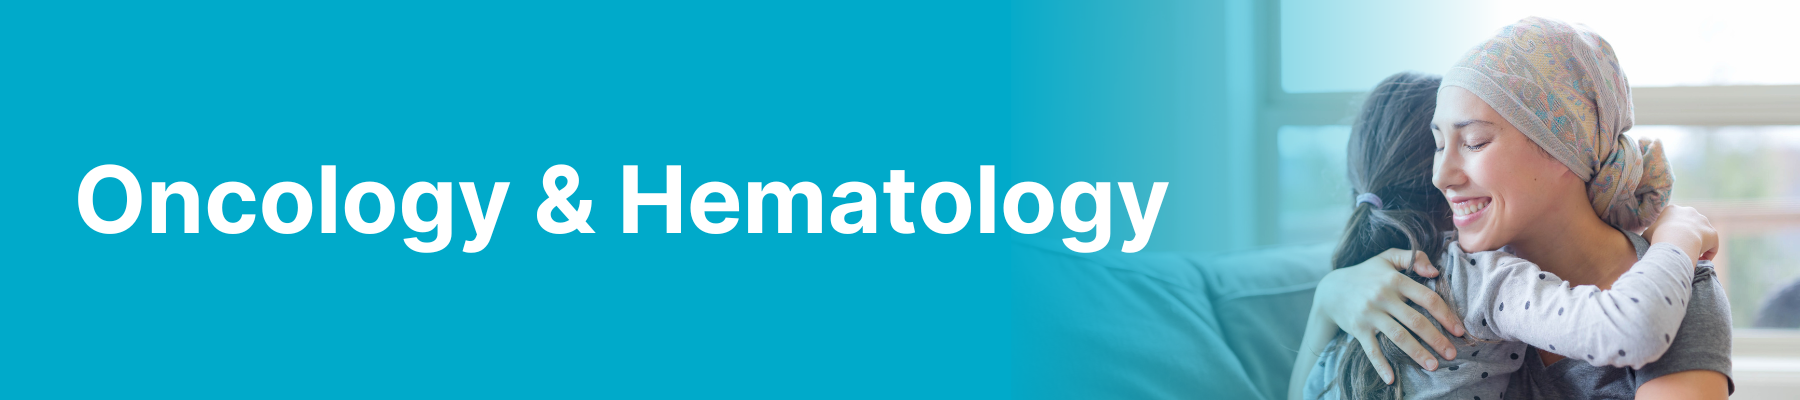 Oncology & Hematology at the Cloquet Hospital